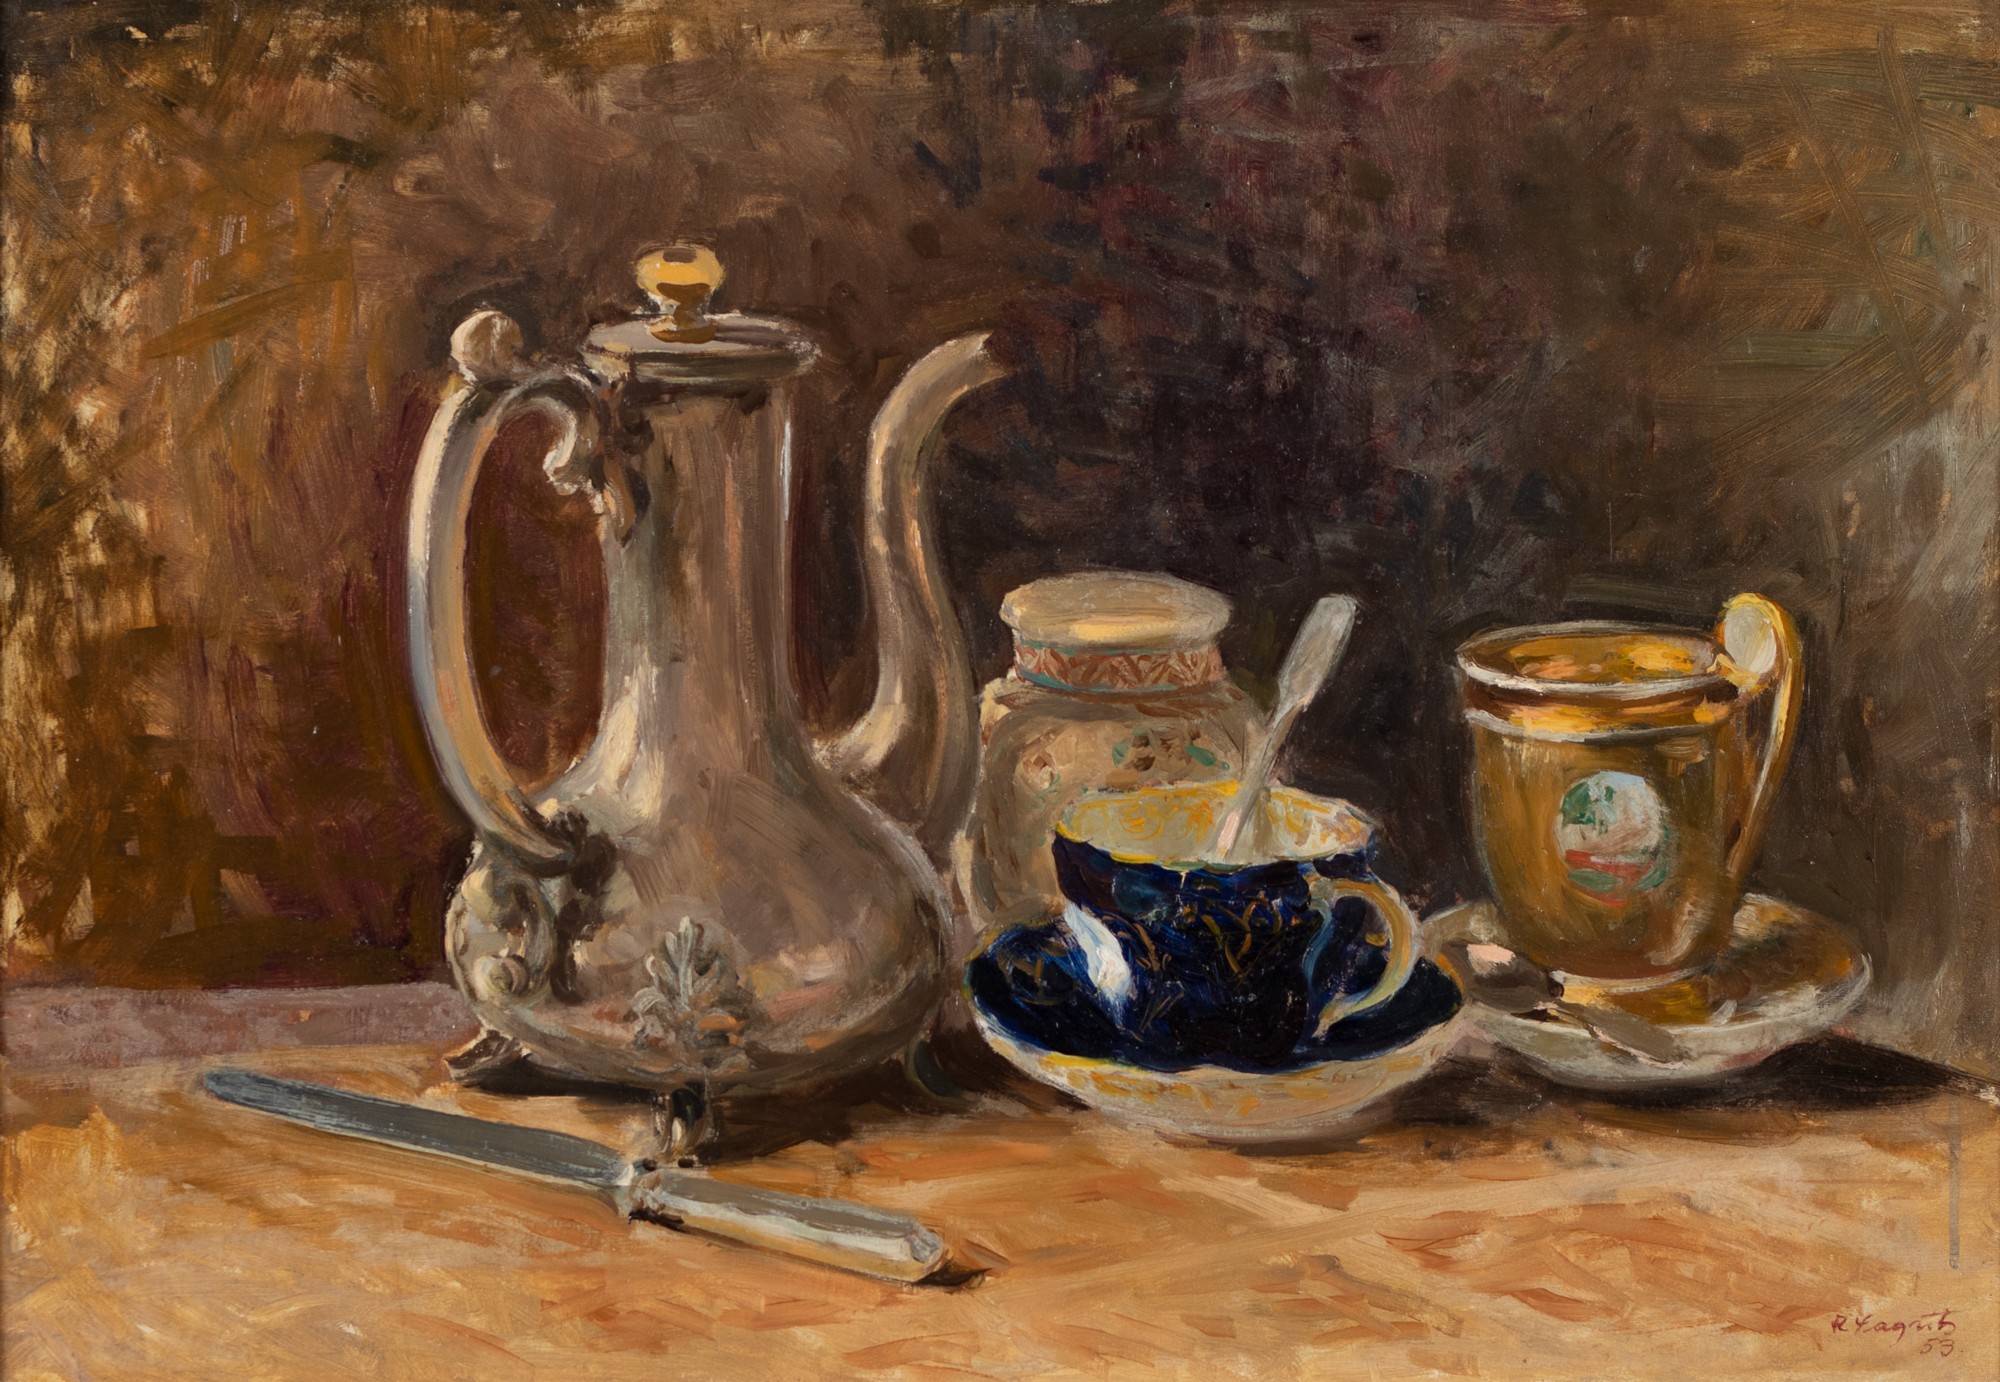 Richard Sagrits "Still-life With Silver Pitcher"